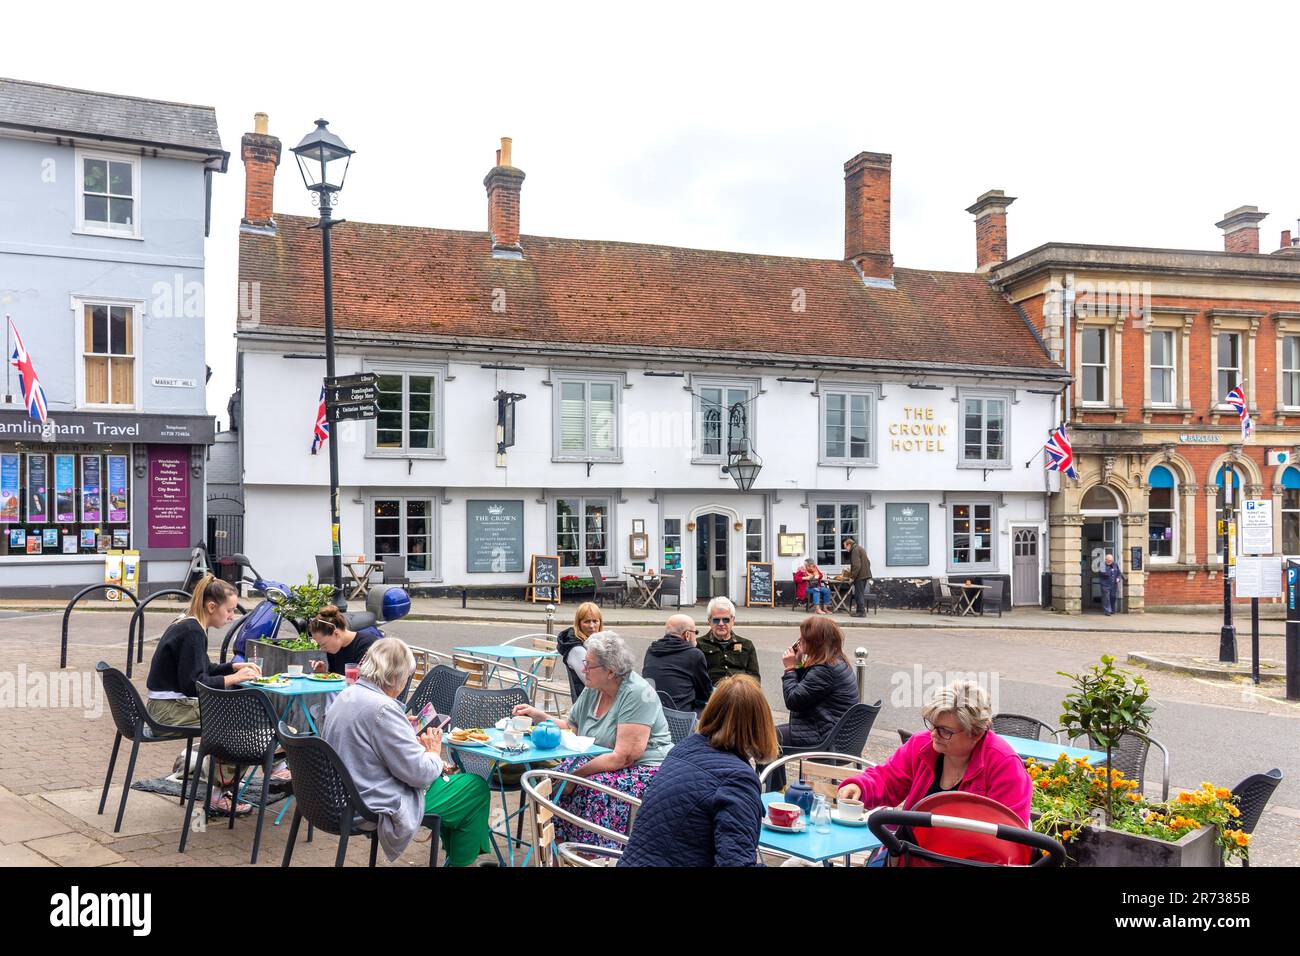 Pavement cafe and The Crown Hotel, Market Hill, Framlington, Suffolk, England, United Kingdom Stock Photo